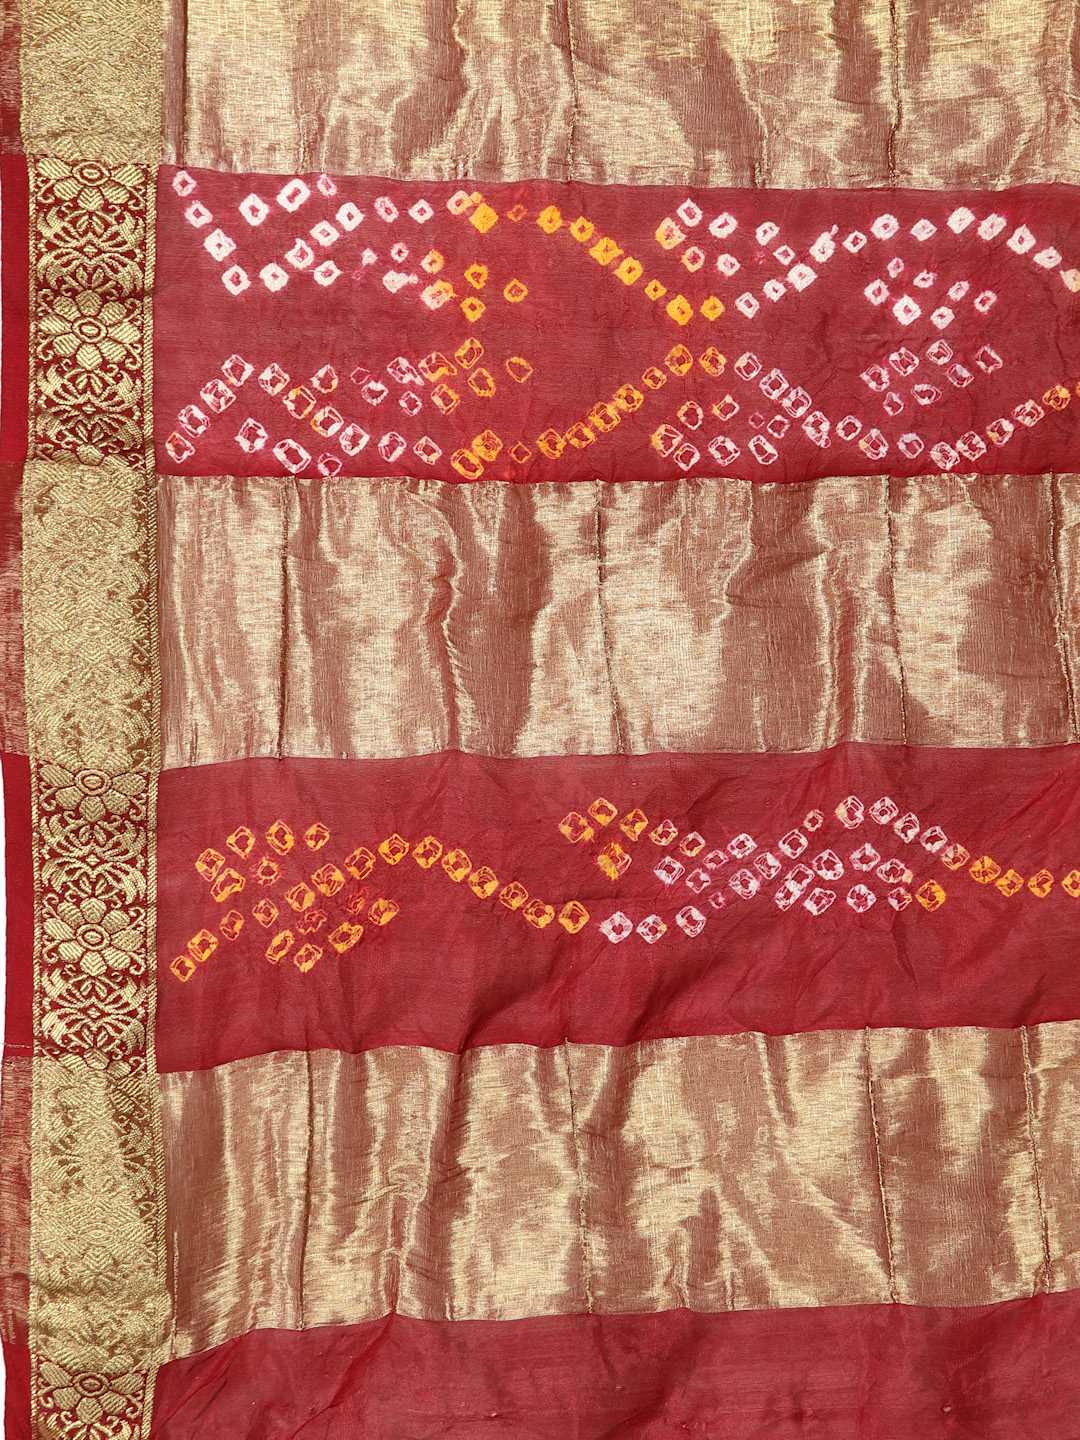 Women Silk Bandhani and Zari Weaving Saree with Unstitched Blouse - Maroon